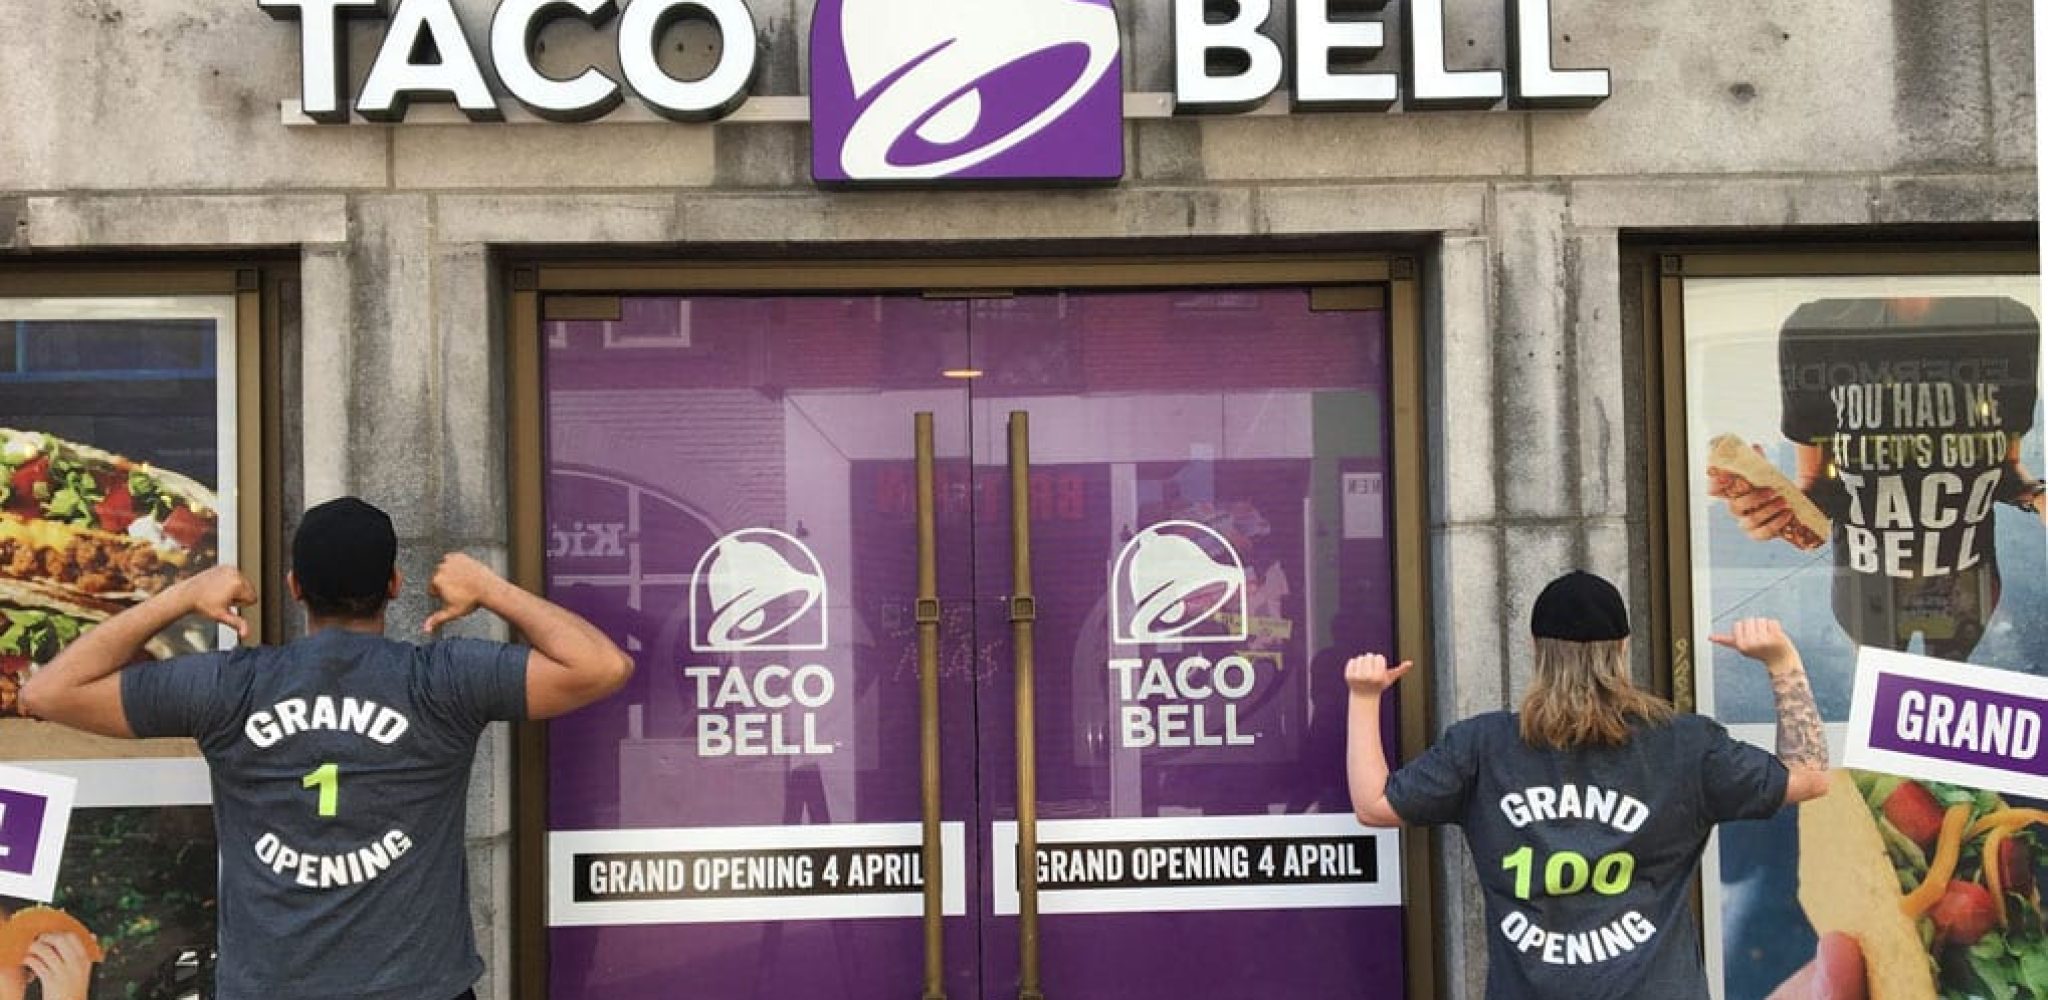 Taco-bell-opening-Eindhoven